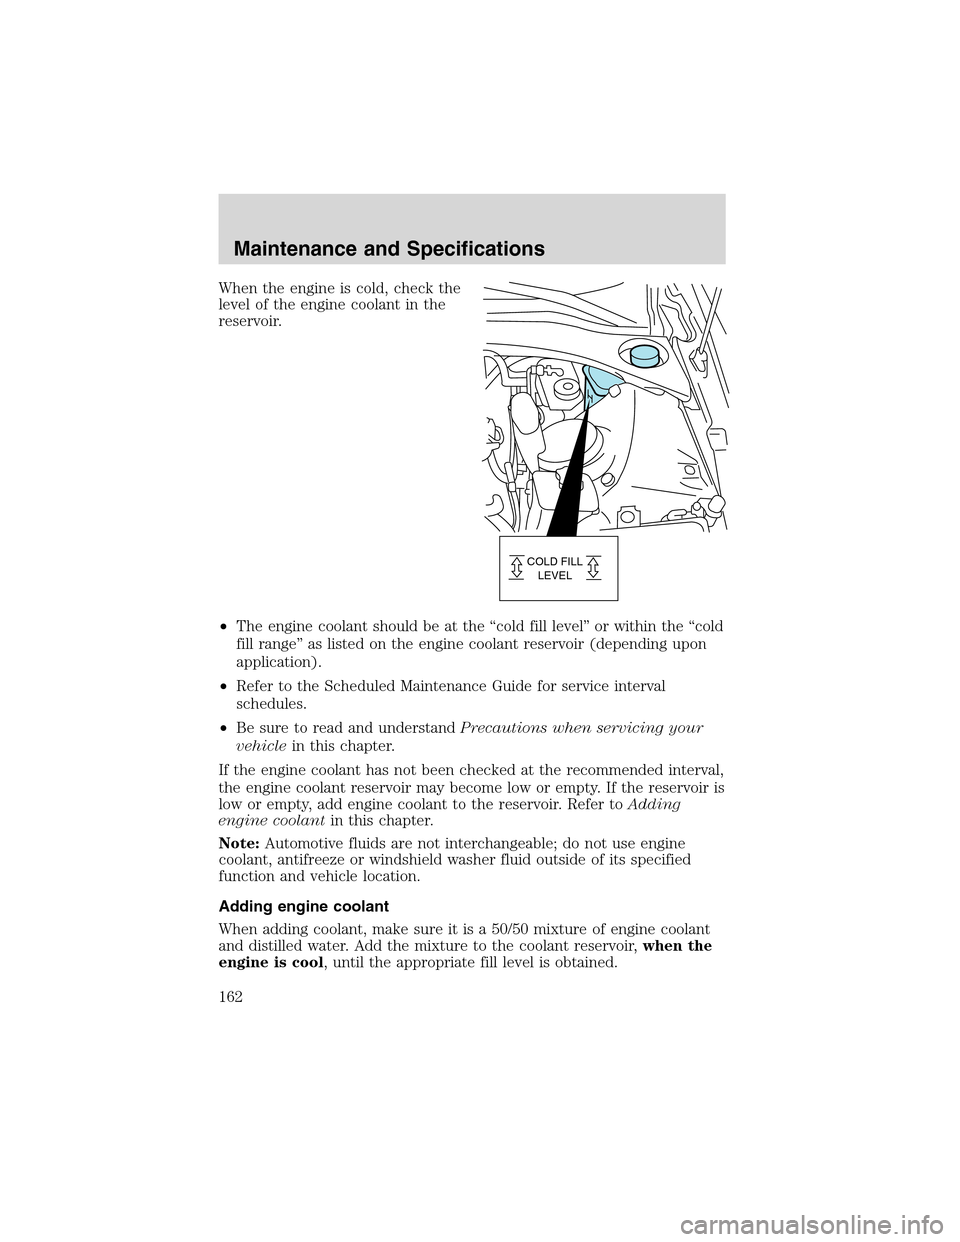 FORD THUNDERBIRD 2003 11.G Service Manual When the engine is cold, check the
level of the engine coolant in the
reservoir.
•The engine coolant should be at the“cold fill level”or within the“cold
fill range”as listed on the engine co